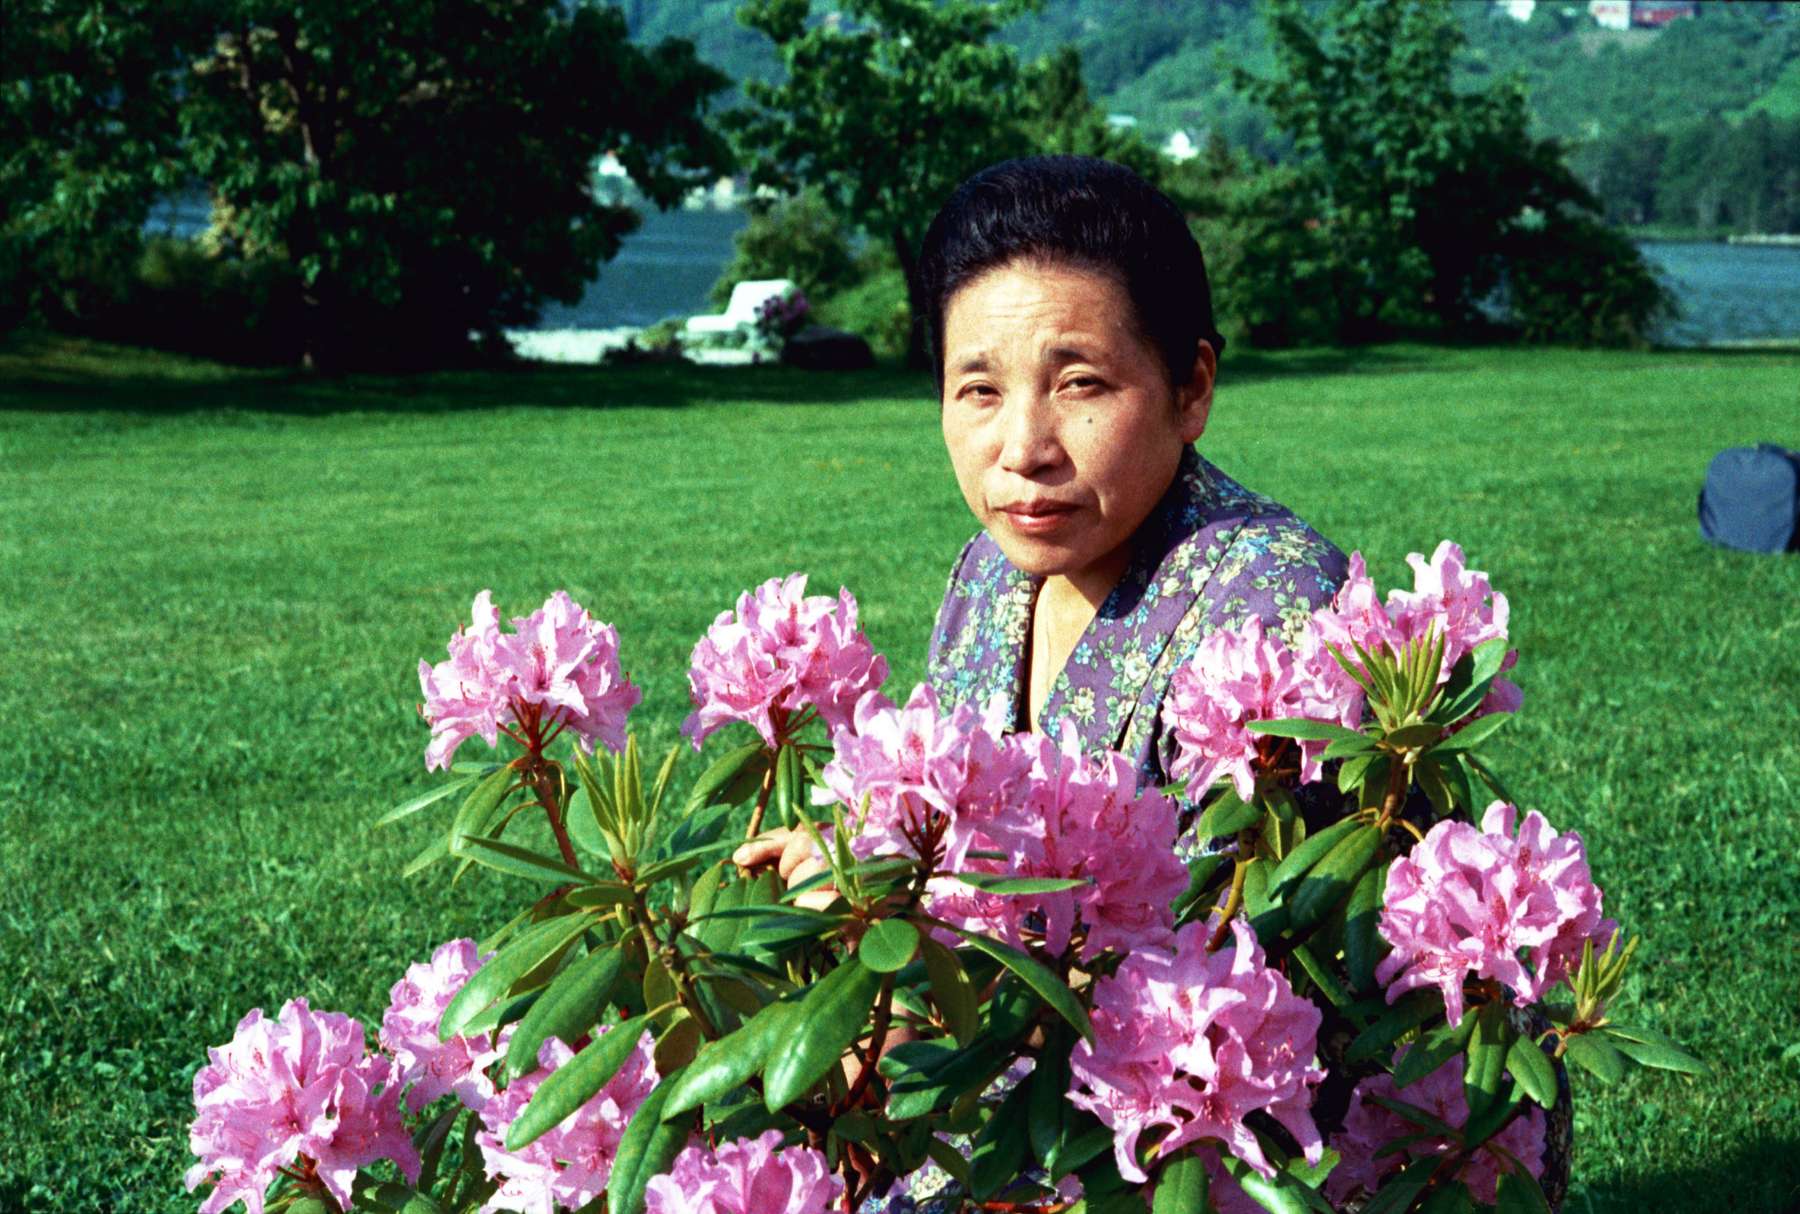 Tomoji, wearing a purple and yellow floral blouse, sits on a large green lawn behind a bush of blooming pink rhododendrons; a lake is visible through trees in the background.